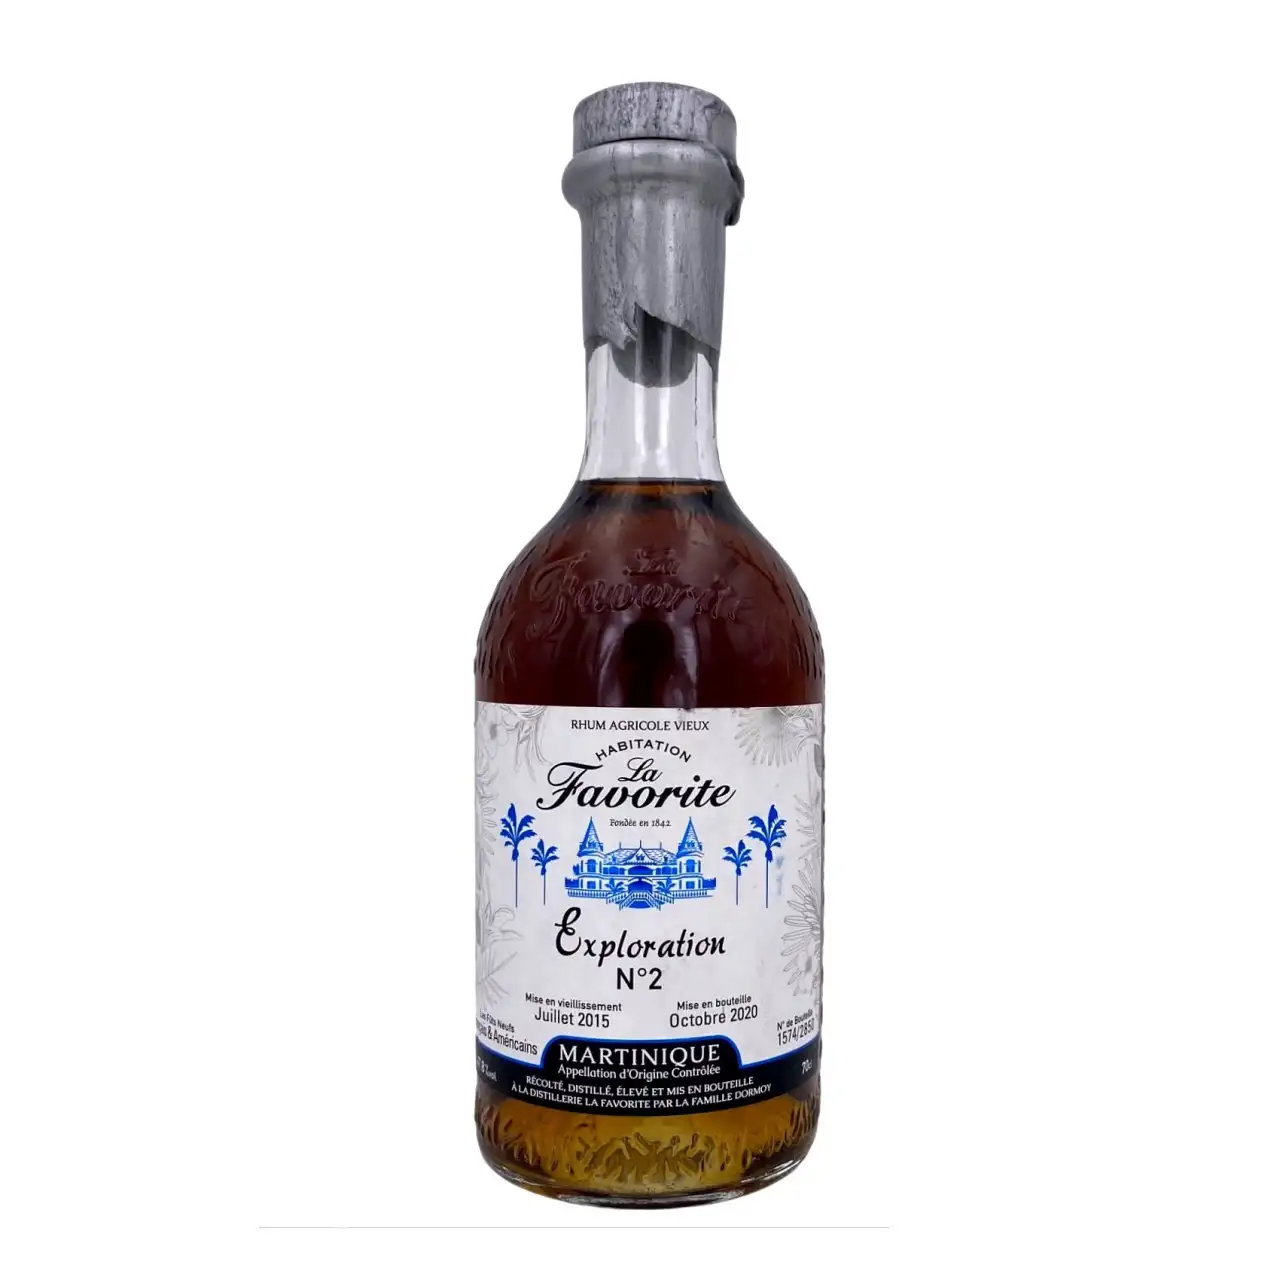 Image of the front of the bottle of the rum Exploration N°2